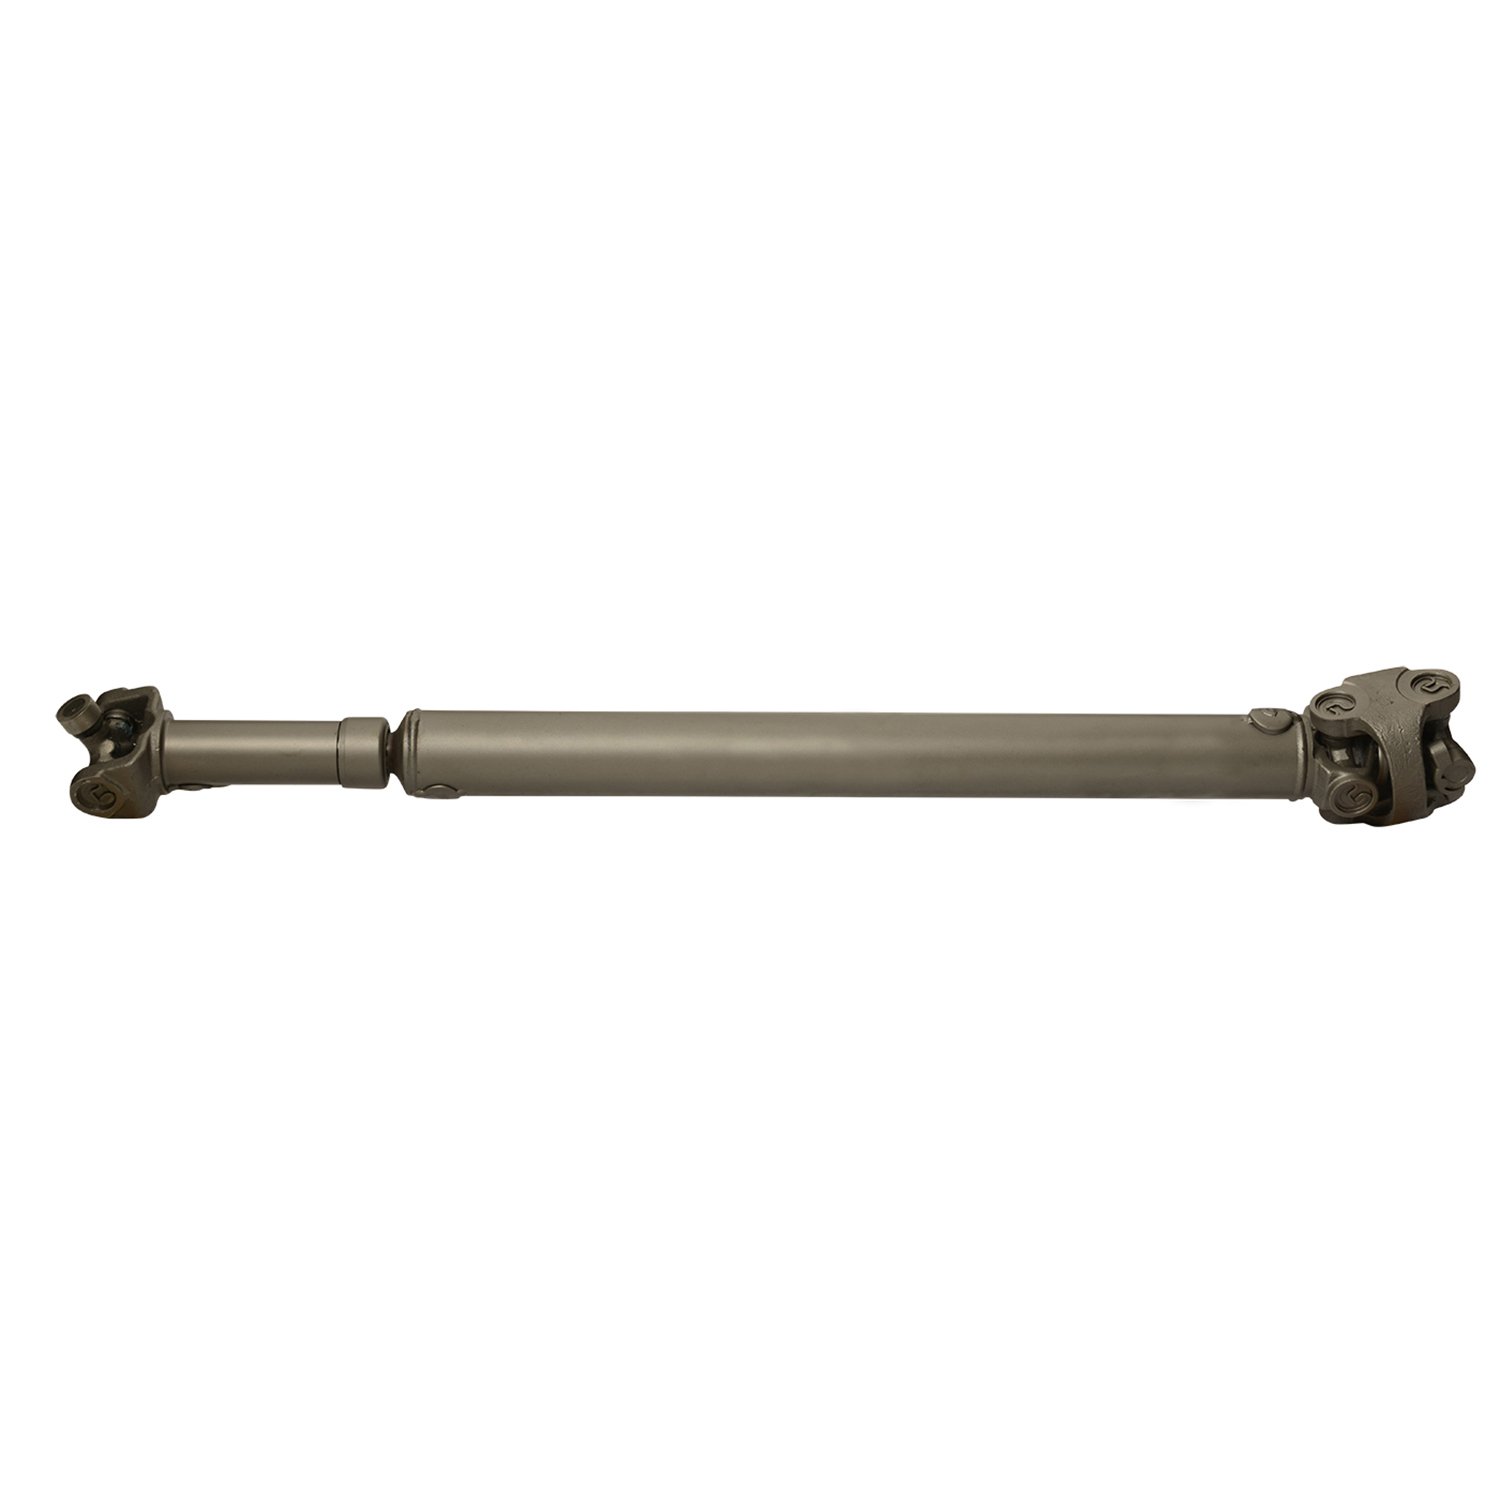 USA Standard ZDS9190 Front Driveshaft, For Bronco, 27 in. Center-To-Center